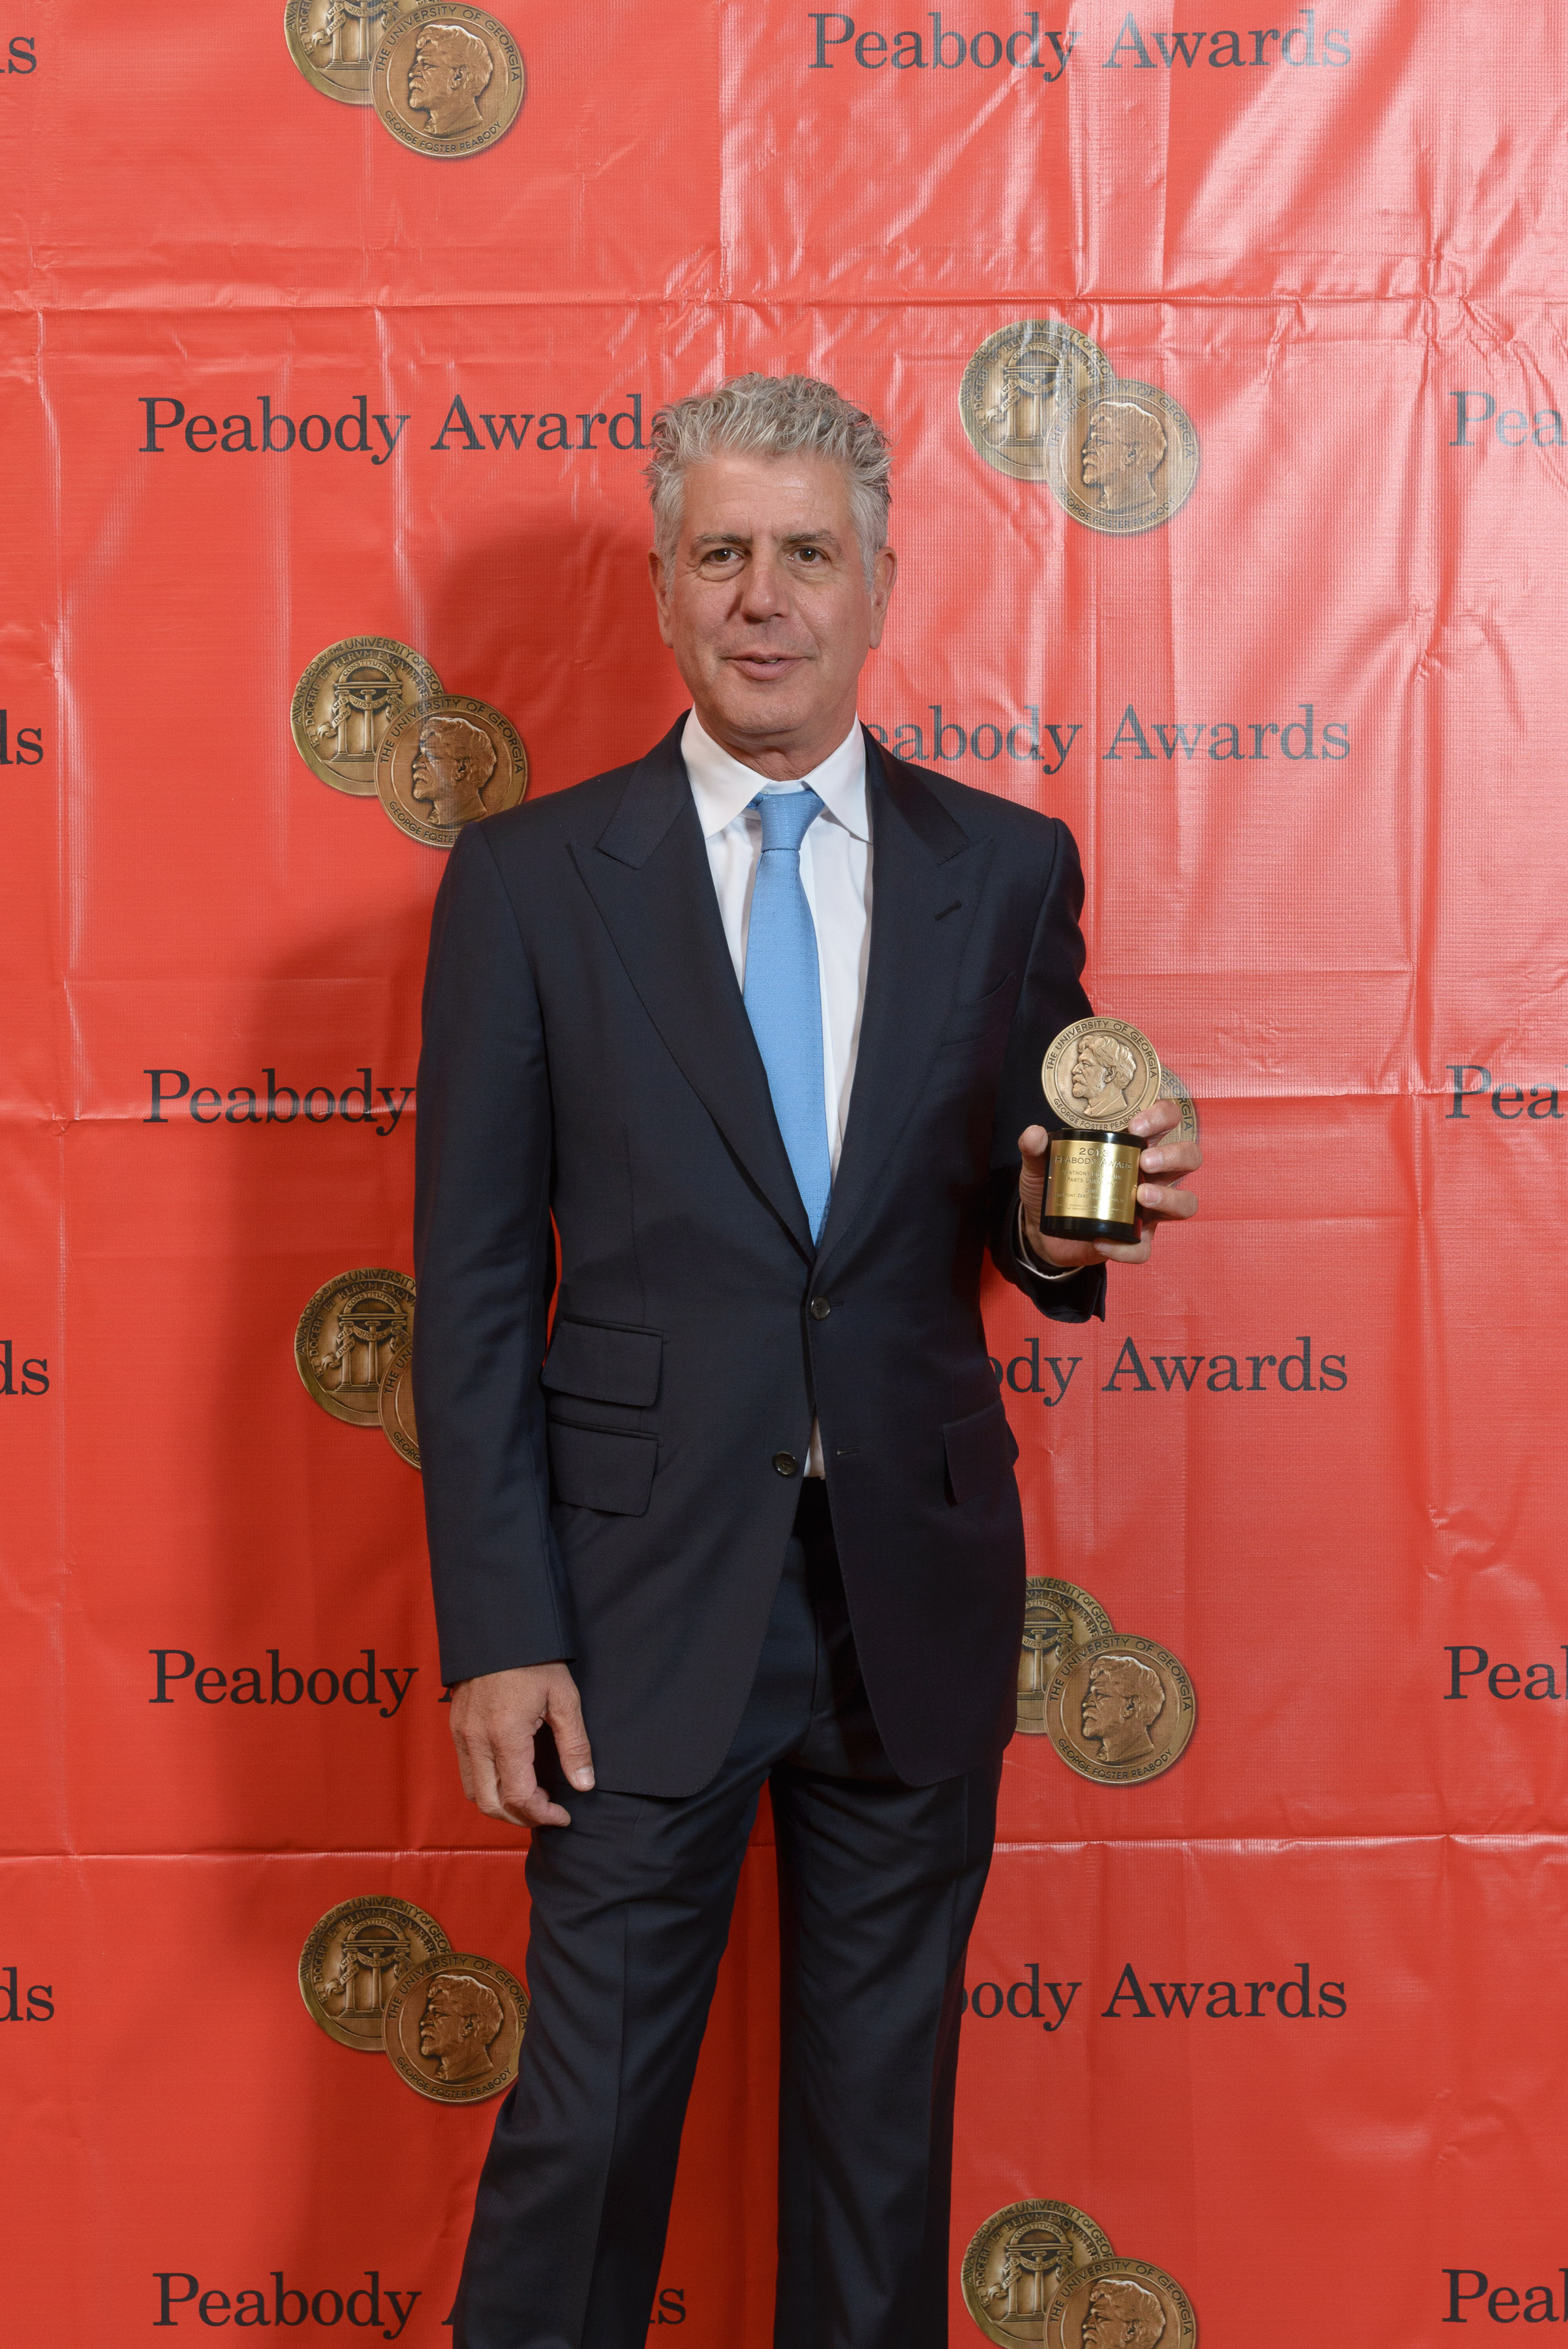 Wikipedia, 2014 Peabody Awards, Anthony Bourdain, Flickr images reviewed by FlickreviewR, Personalit